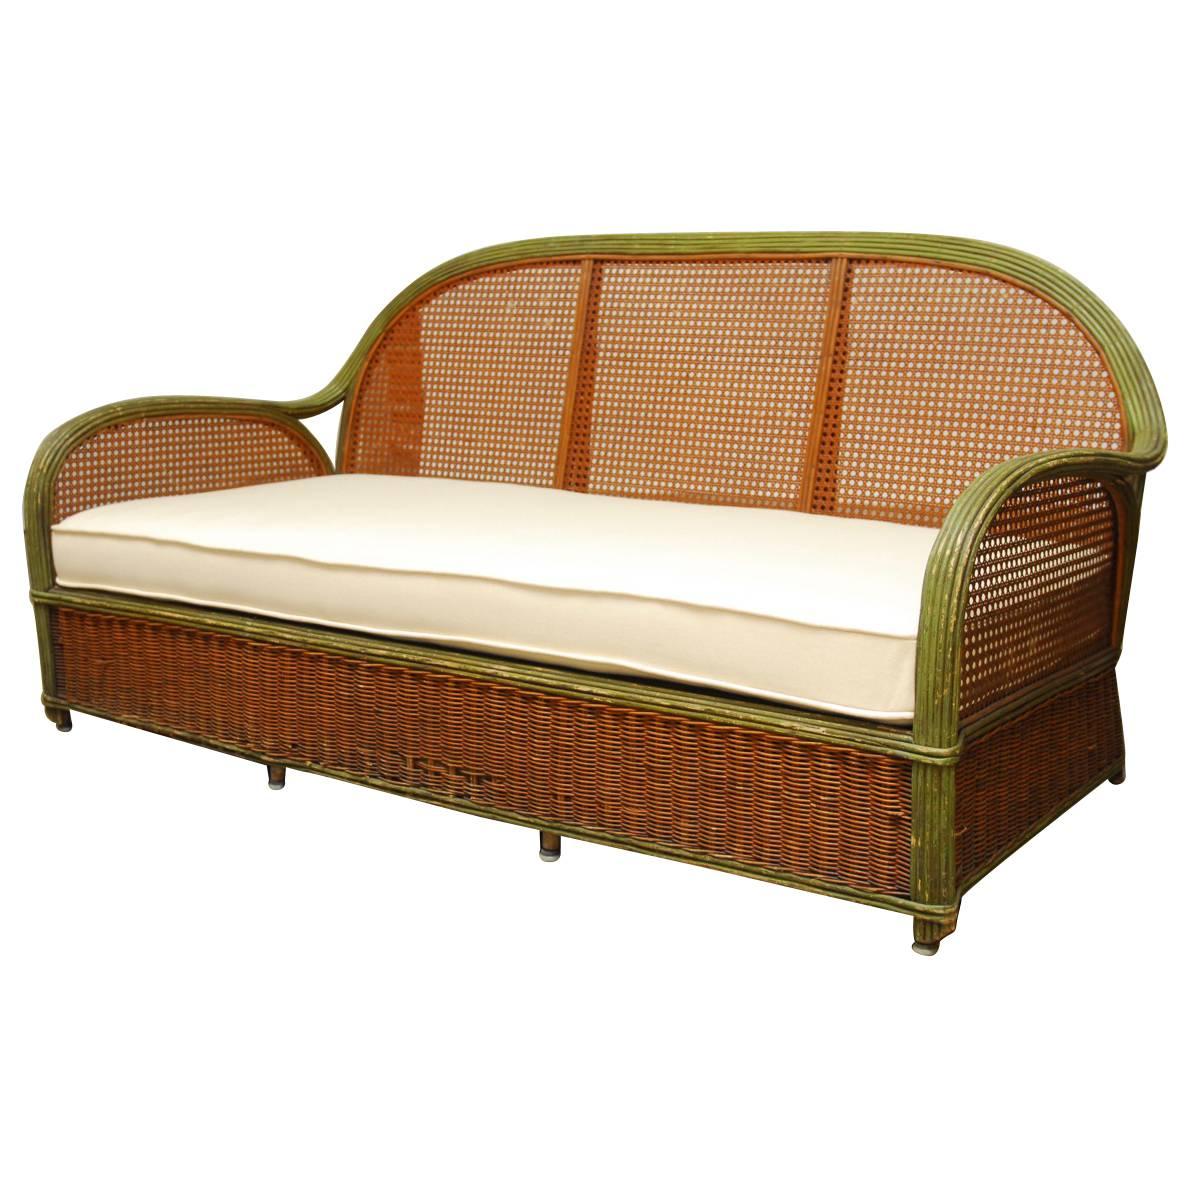 French Art Deco Wicker and Cane Settee